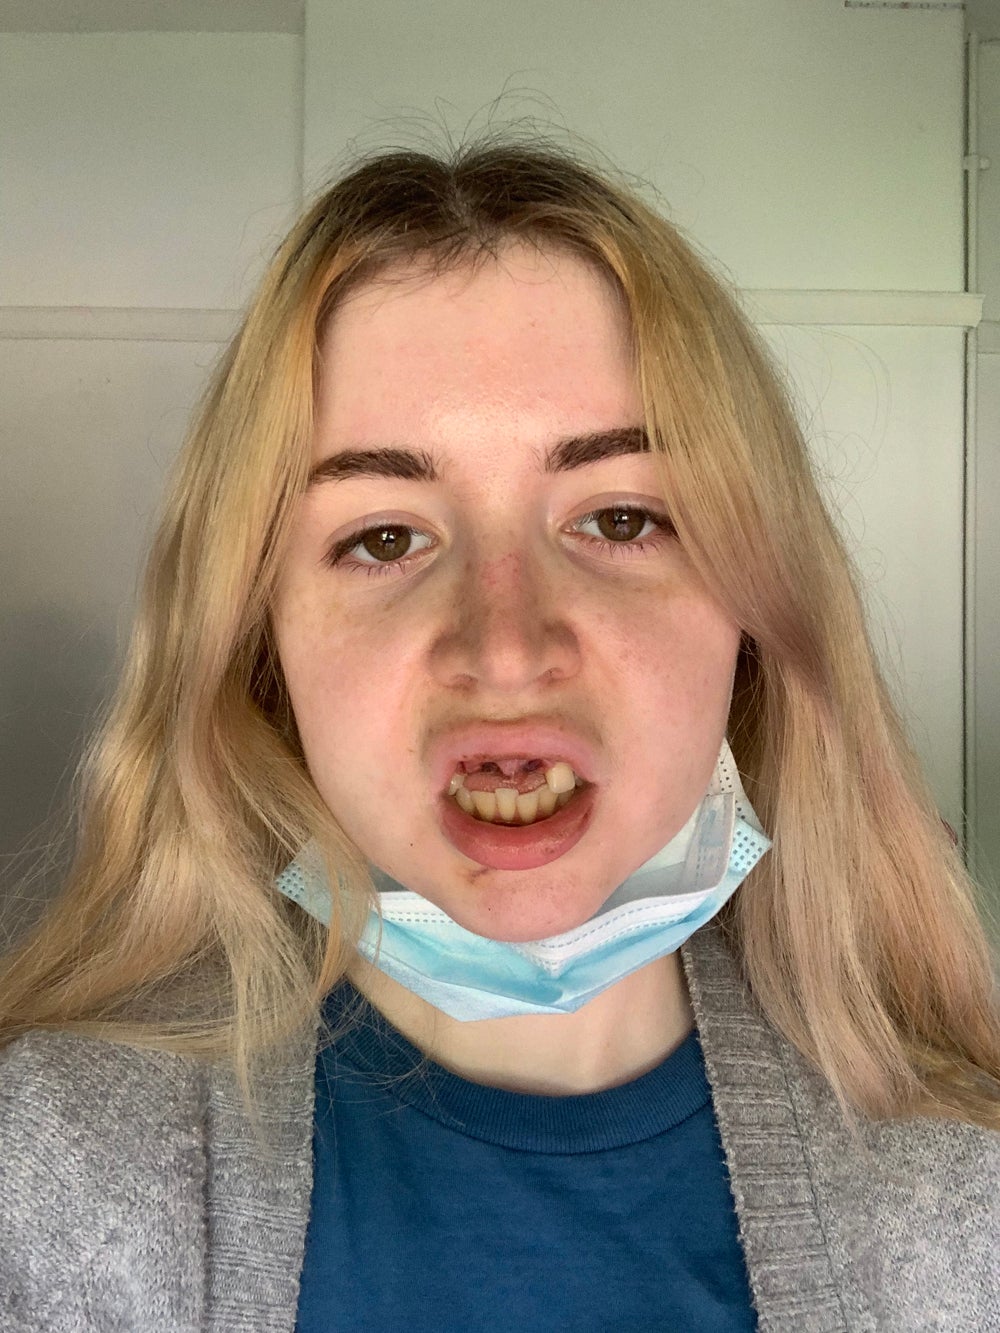 Georgina Rossiter, 24, has lost her three front teeth (Collect/PA Real Life)